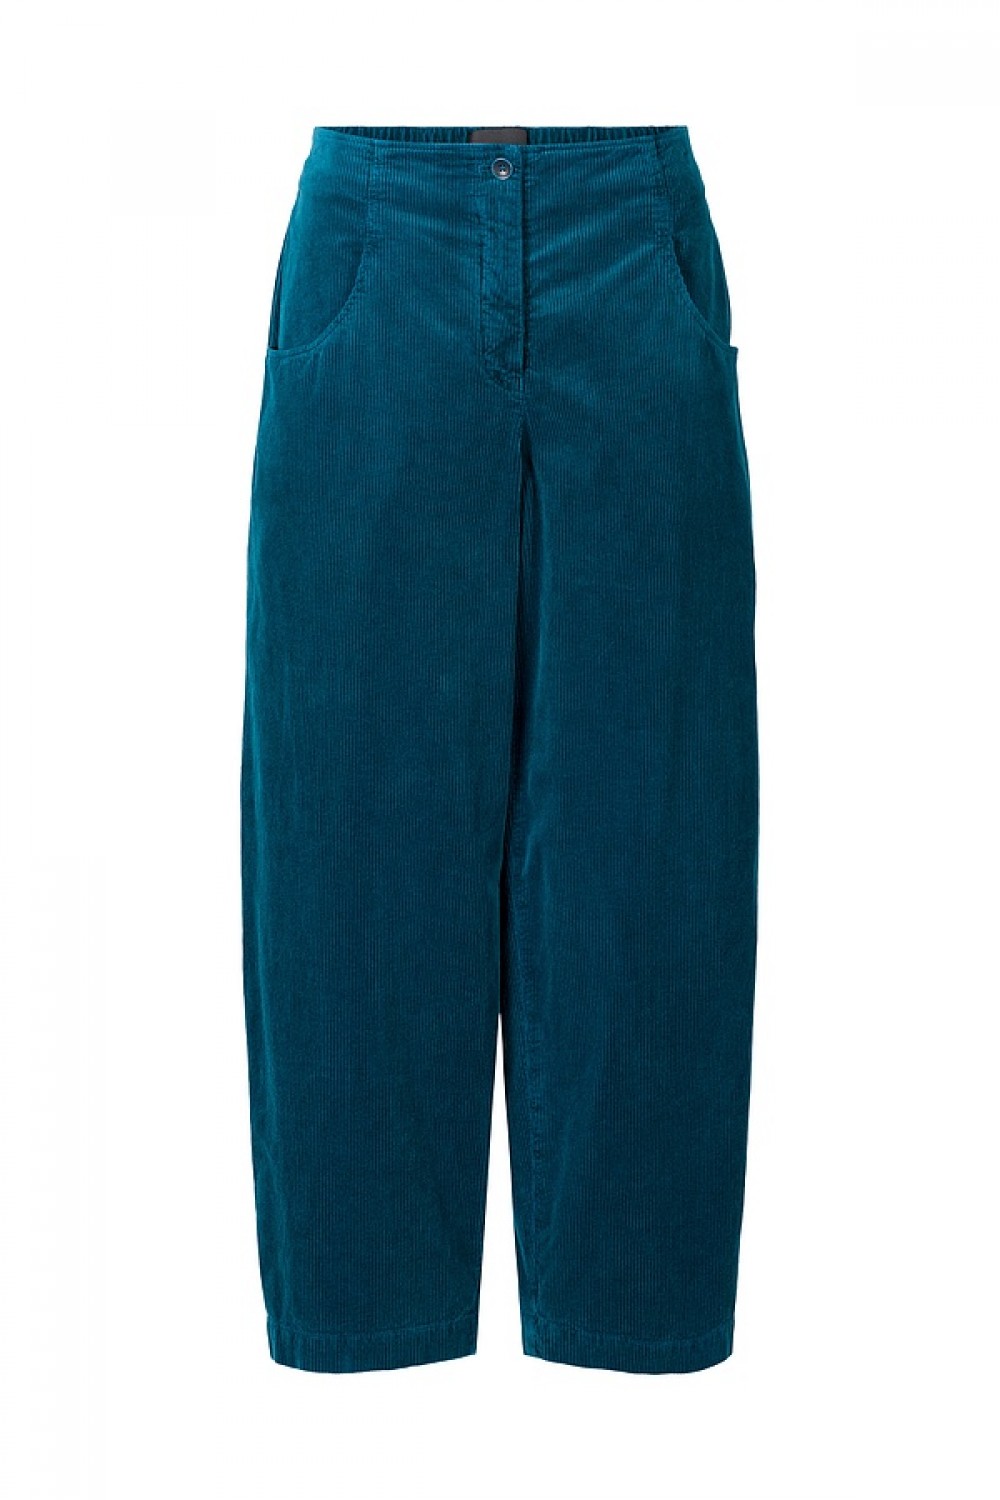 OSKA Trousers Kahren 314 Teal / Cotton Cord With Stretch Content